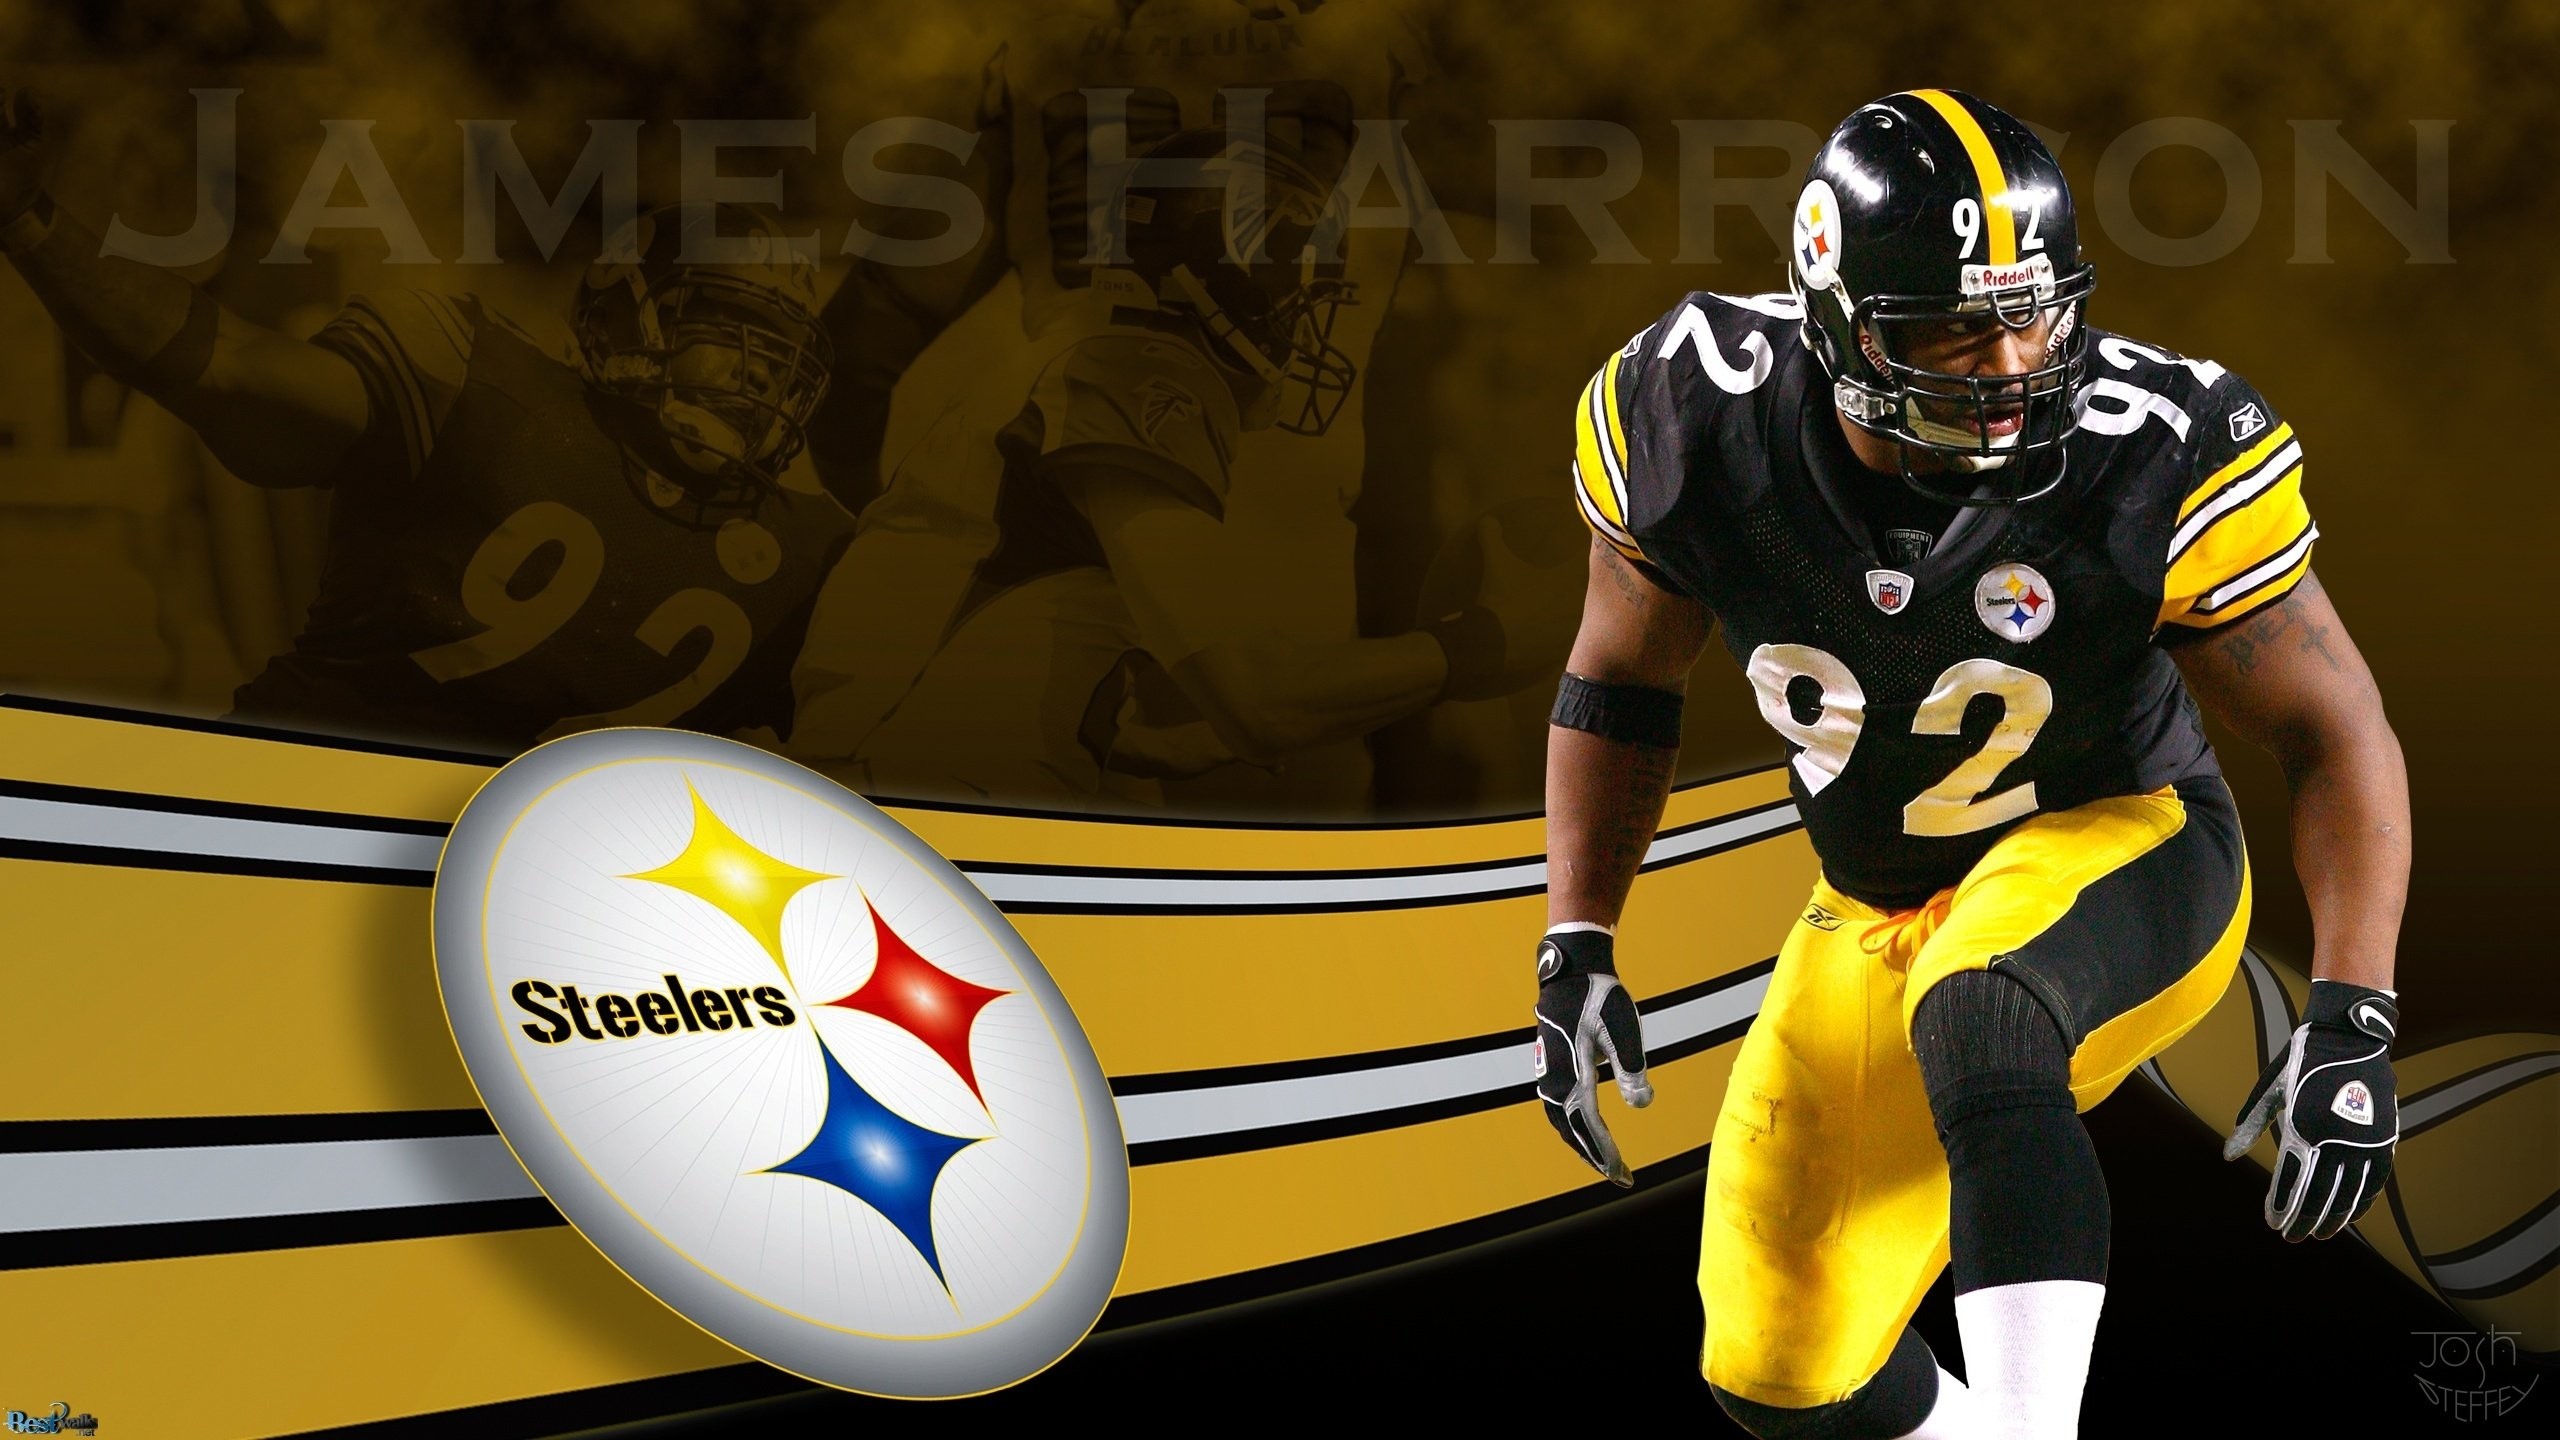 2560x1440 Download James Harrison Live Wallpaper for Android - Appszoom